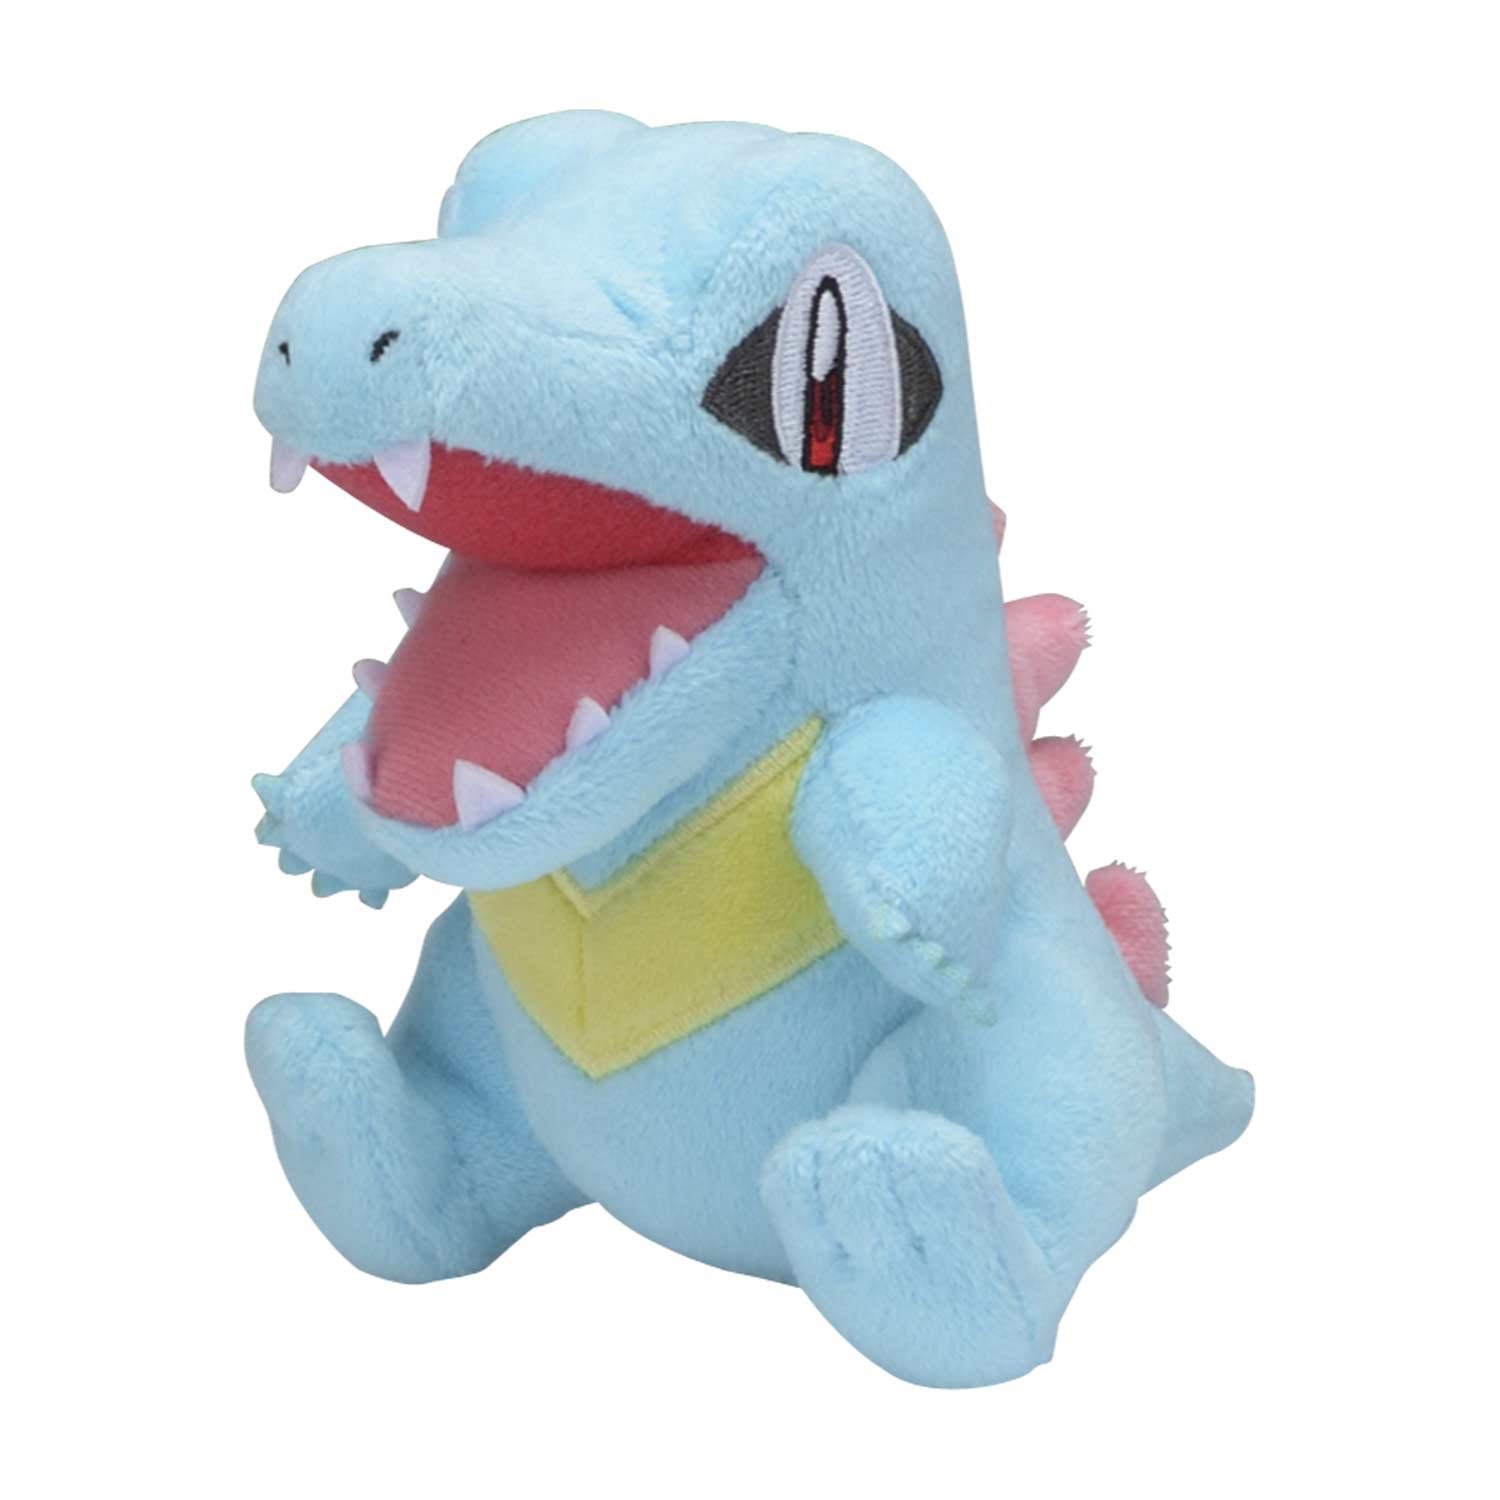 Pokemon Center Reviews Thining About Totodile Plushies T Co Yzuzsmrgbj Twitter